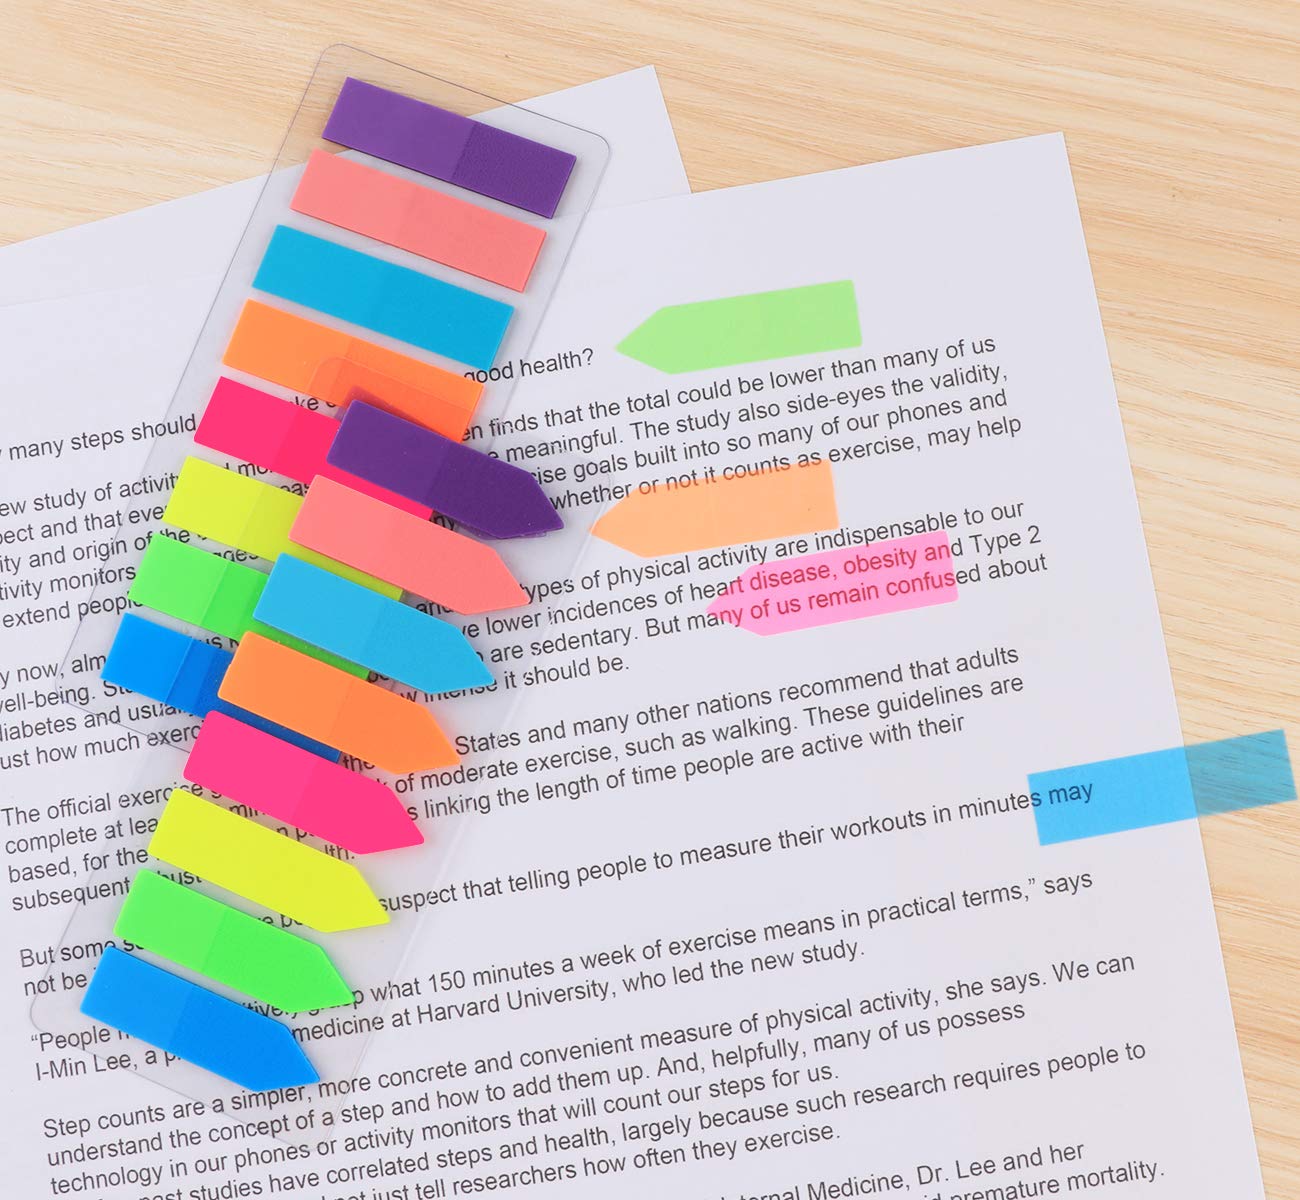 Agoer 1920 Pcs Sticky Notes Flags Index Tabs Sticky Markers Flags Colourful Small Neon Arrow Writeable Adhesive Strips for Page Marking Mini File Tabs Flags as Reading Notes Book Markers